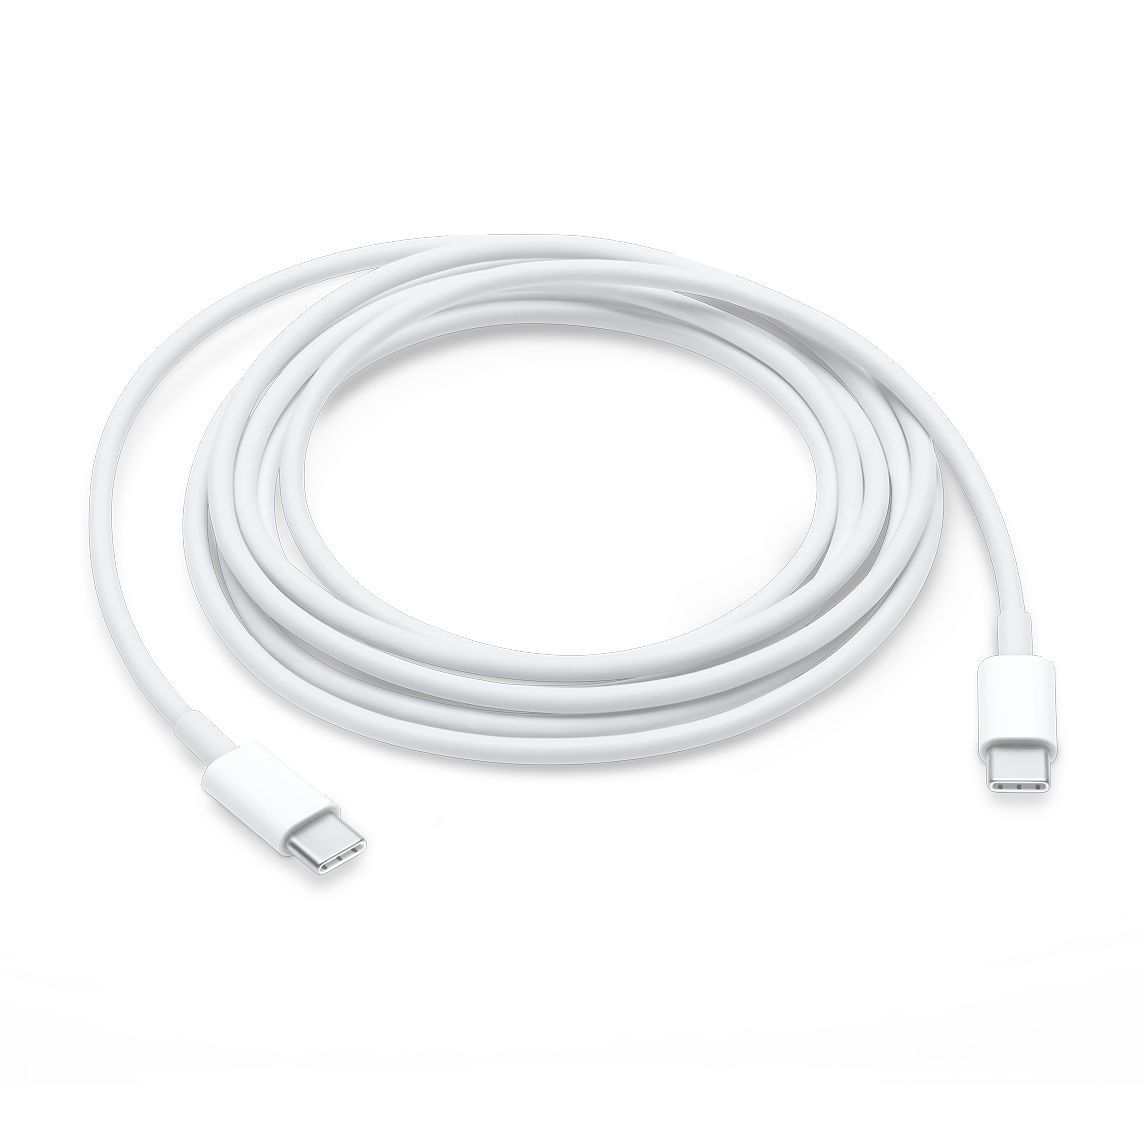 Apple 2m USB-C Charge Cable